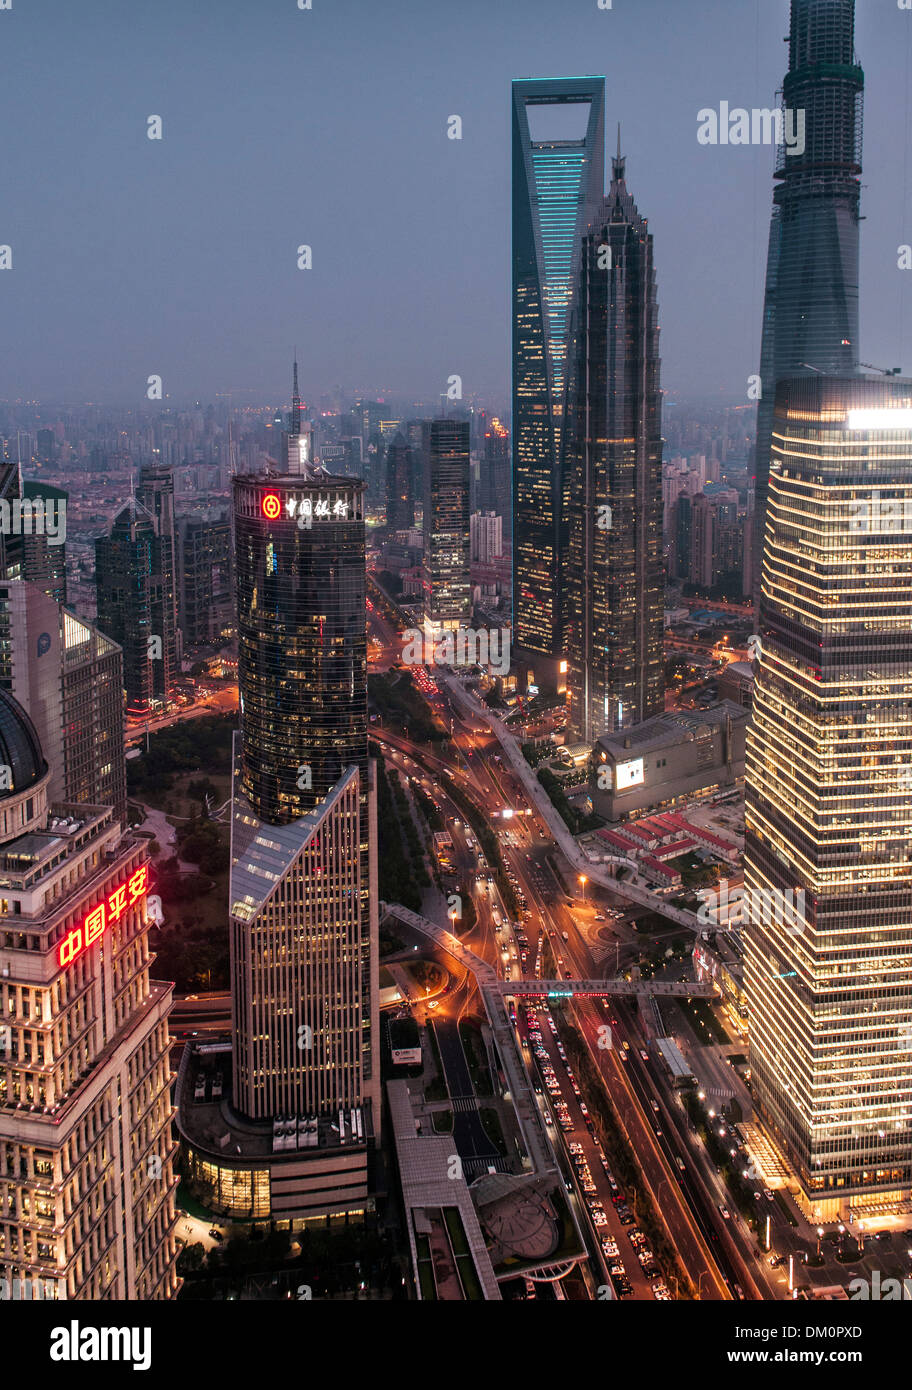 Cityscape, view of IFC, SWFC, Shanghai World Financial Center, Jin Mao Tower at night, Lujiazui, Pudong, Shanghai, China Stock Photo